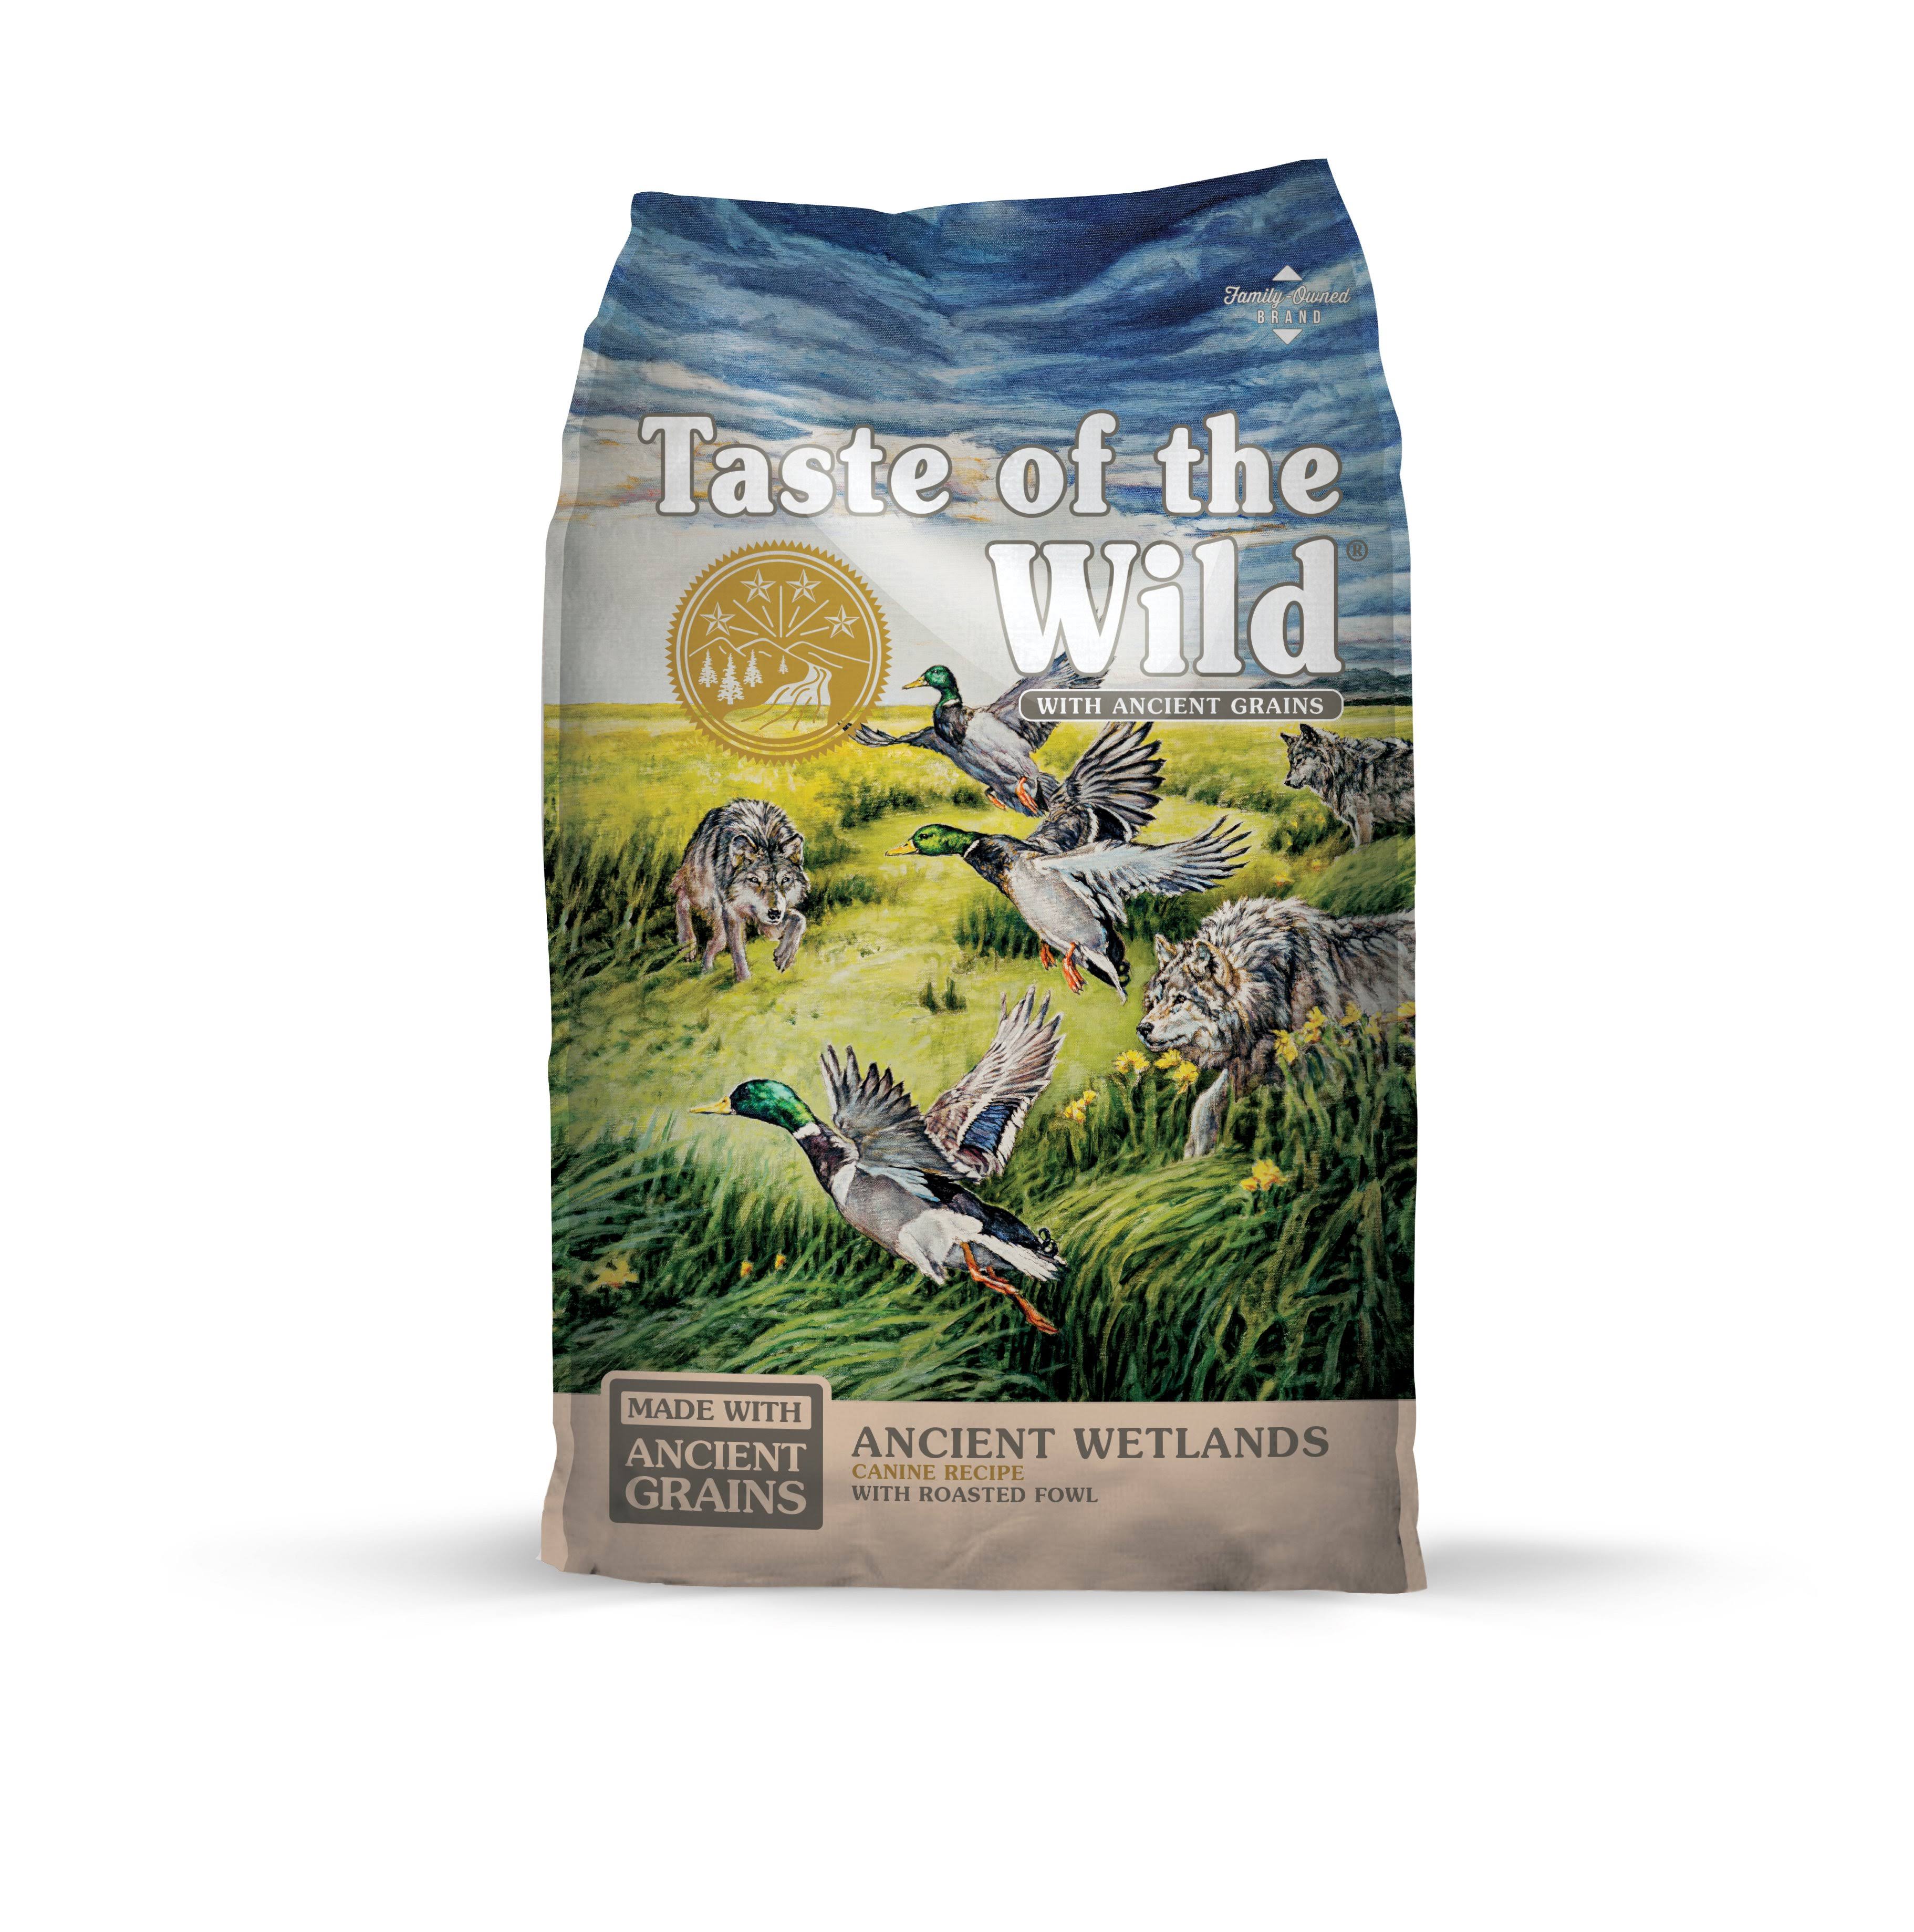 Taste of The Wild Ancient Wetlands with Roasted Fowl Dog Food 28 lbs